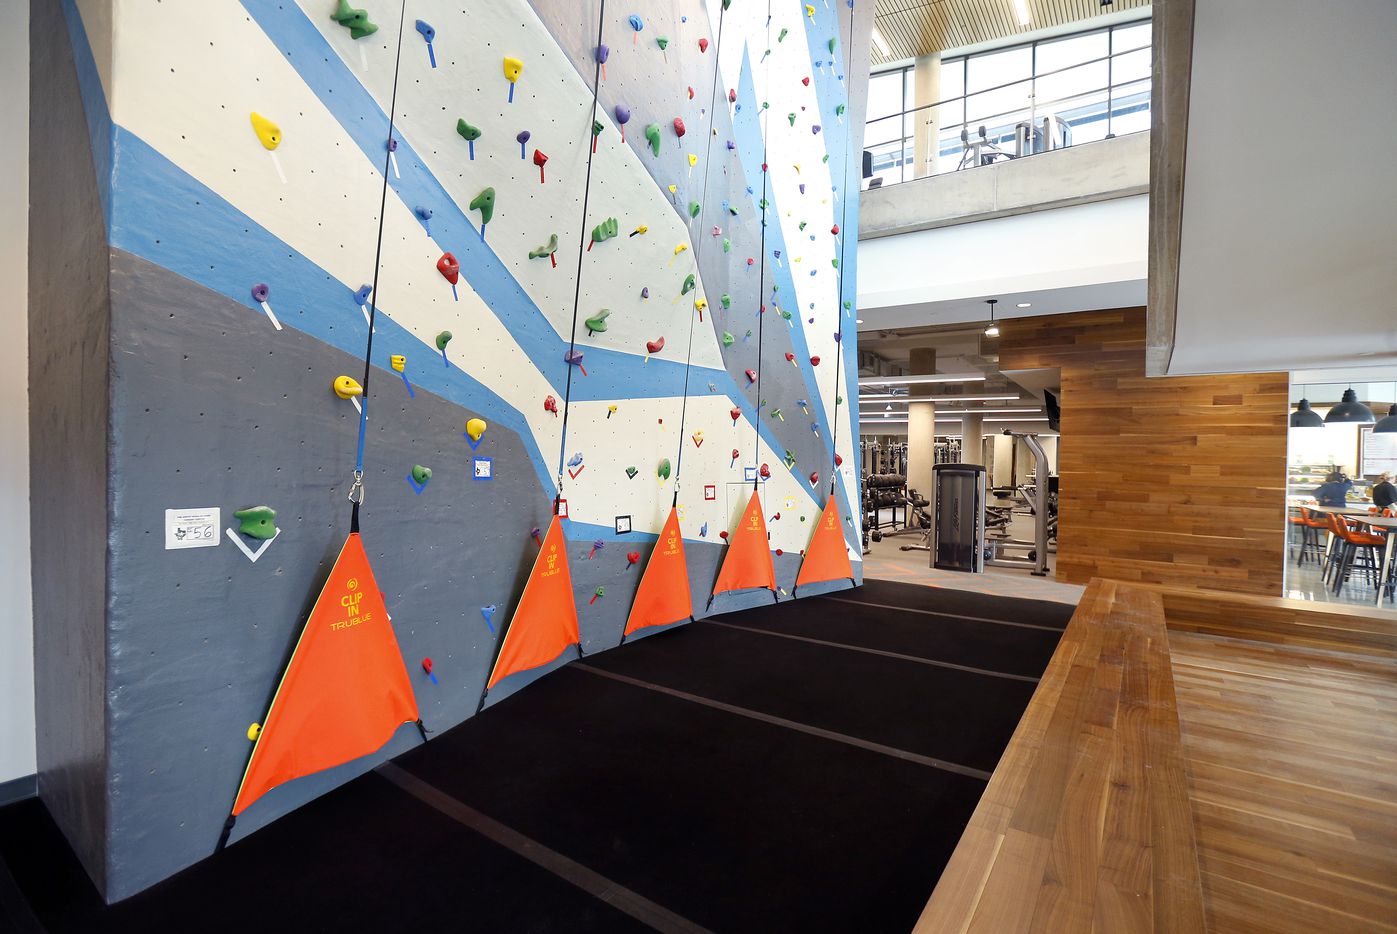 A two-story climbing wall is part of the fitness center.